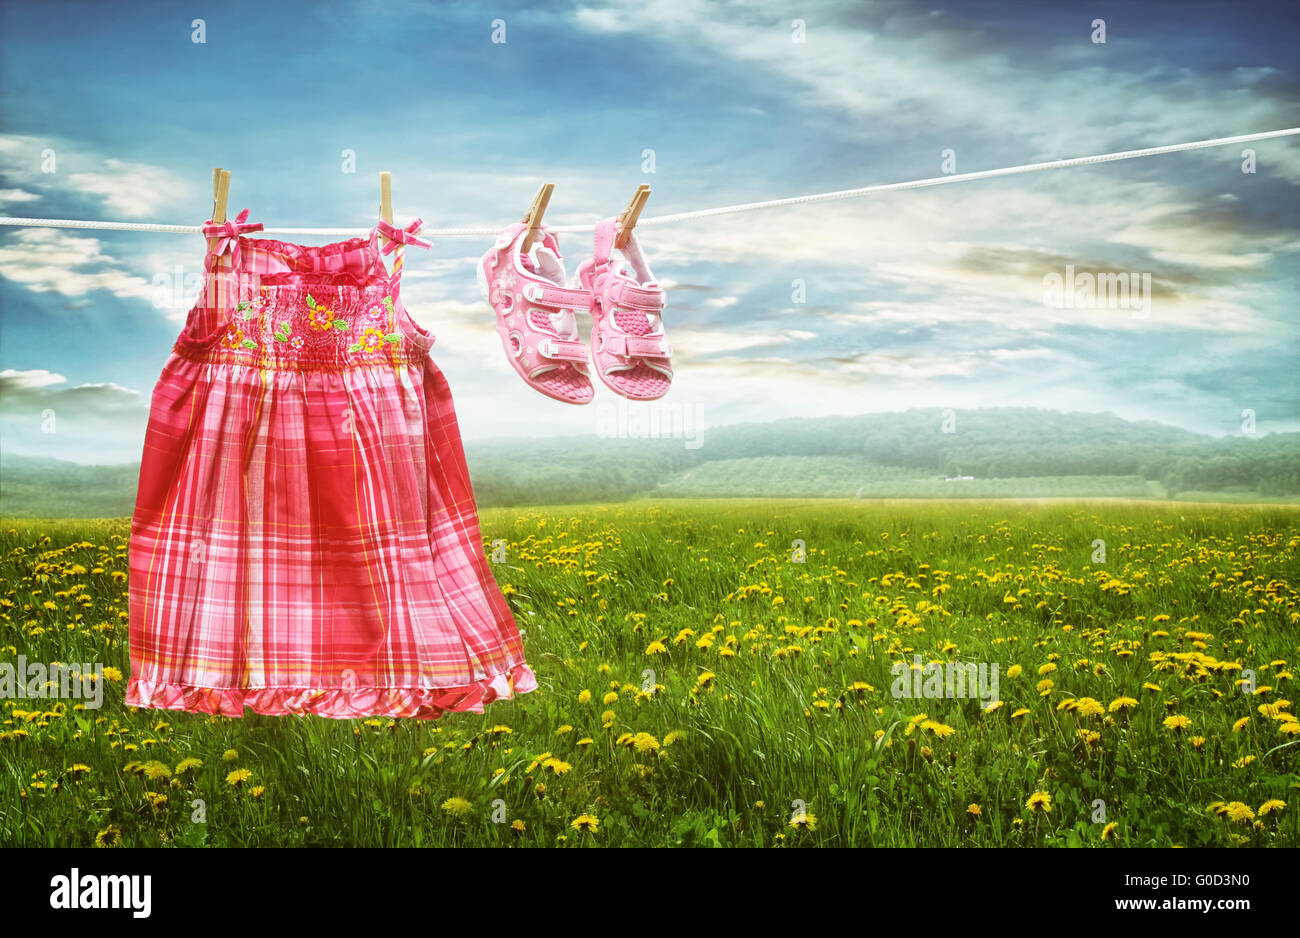 Dress and sandals on clothesline in summer fields Stock Photo